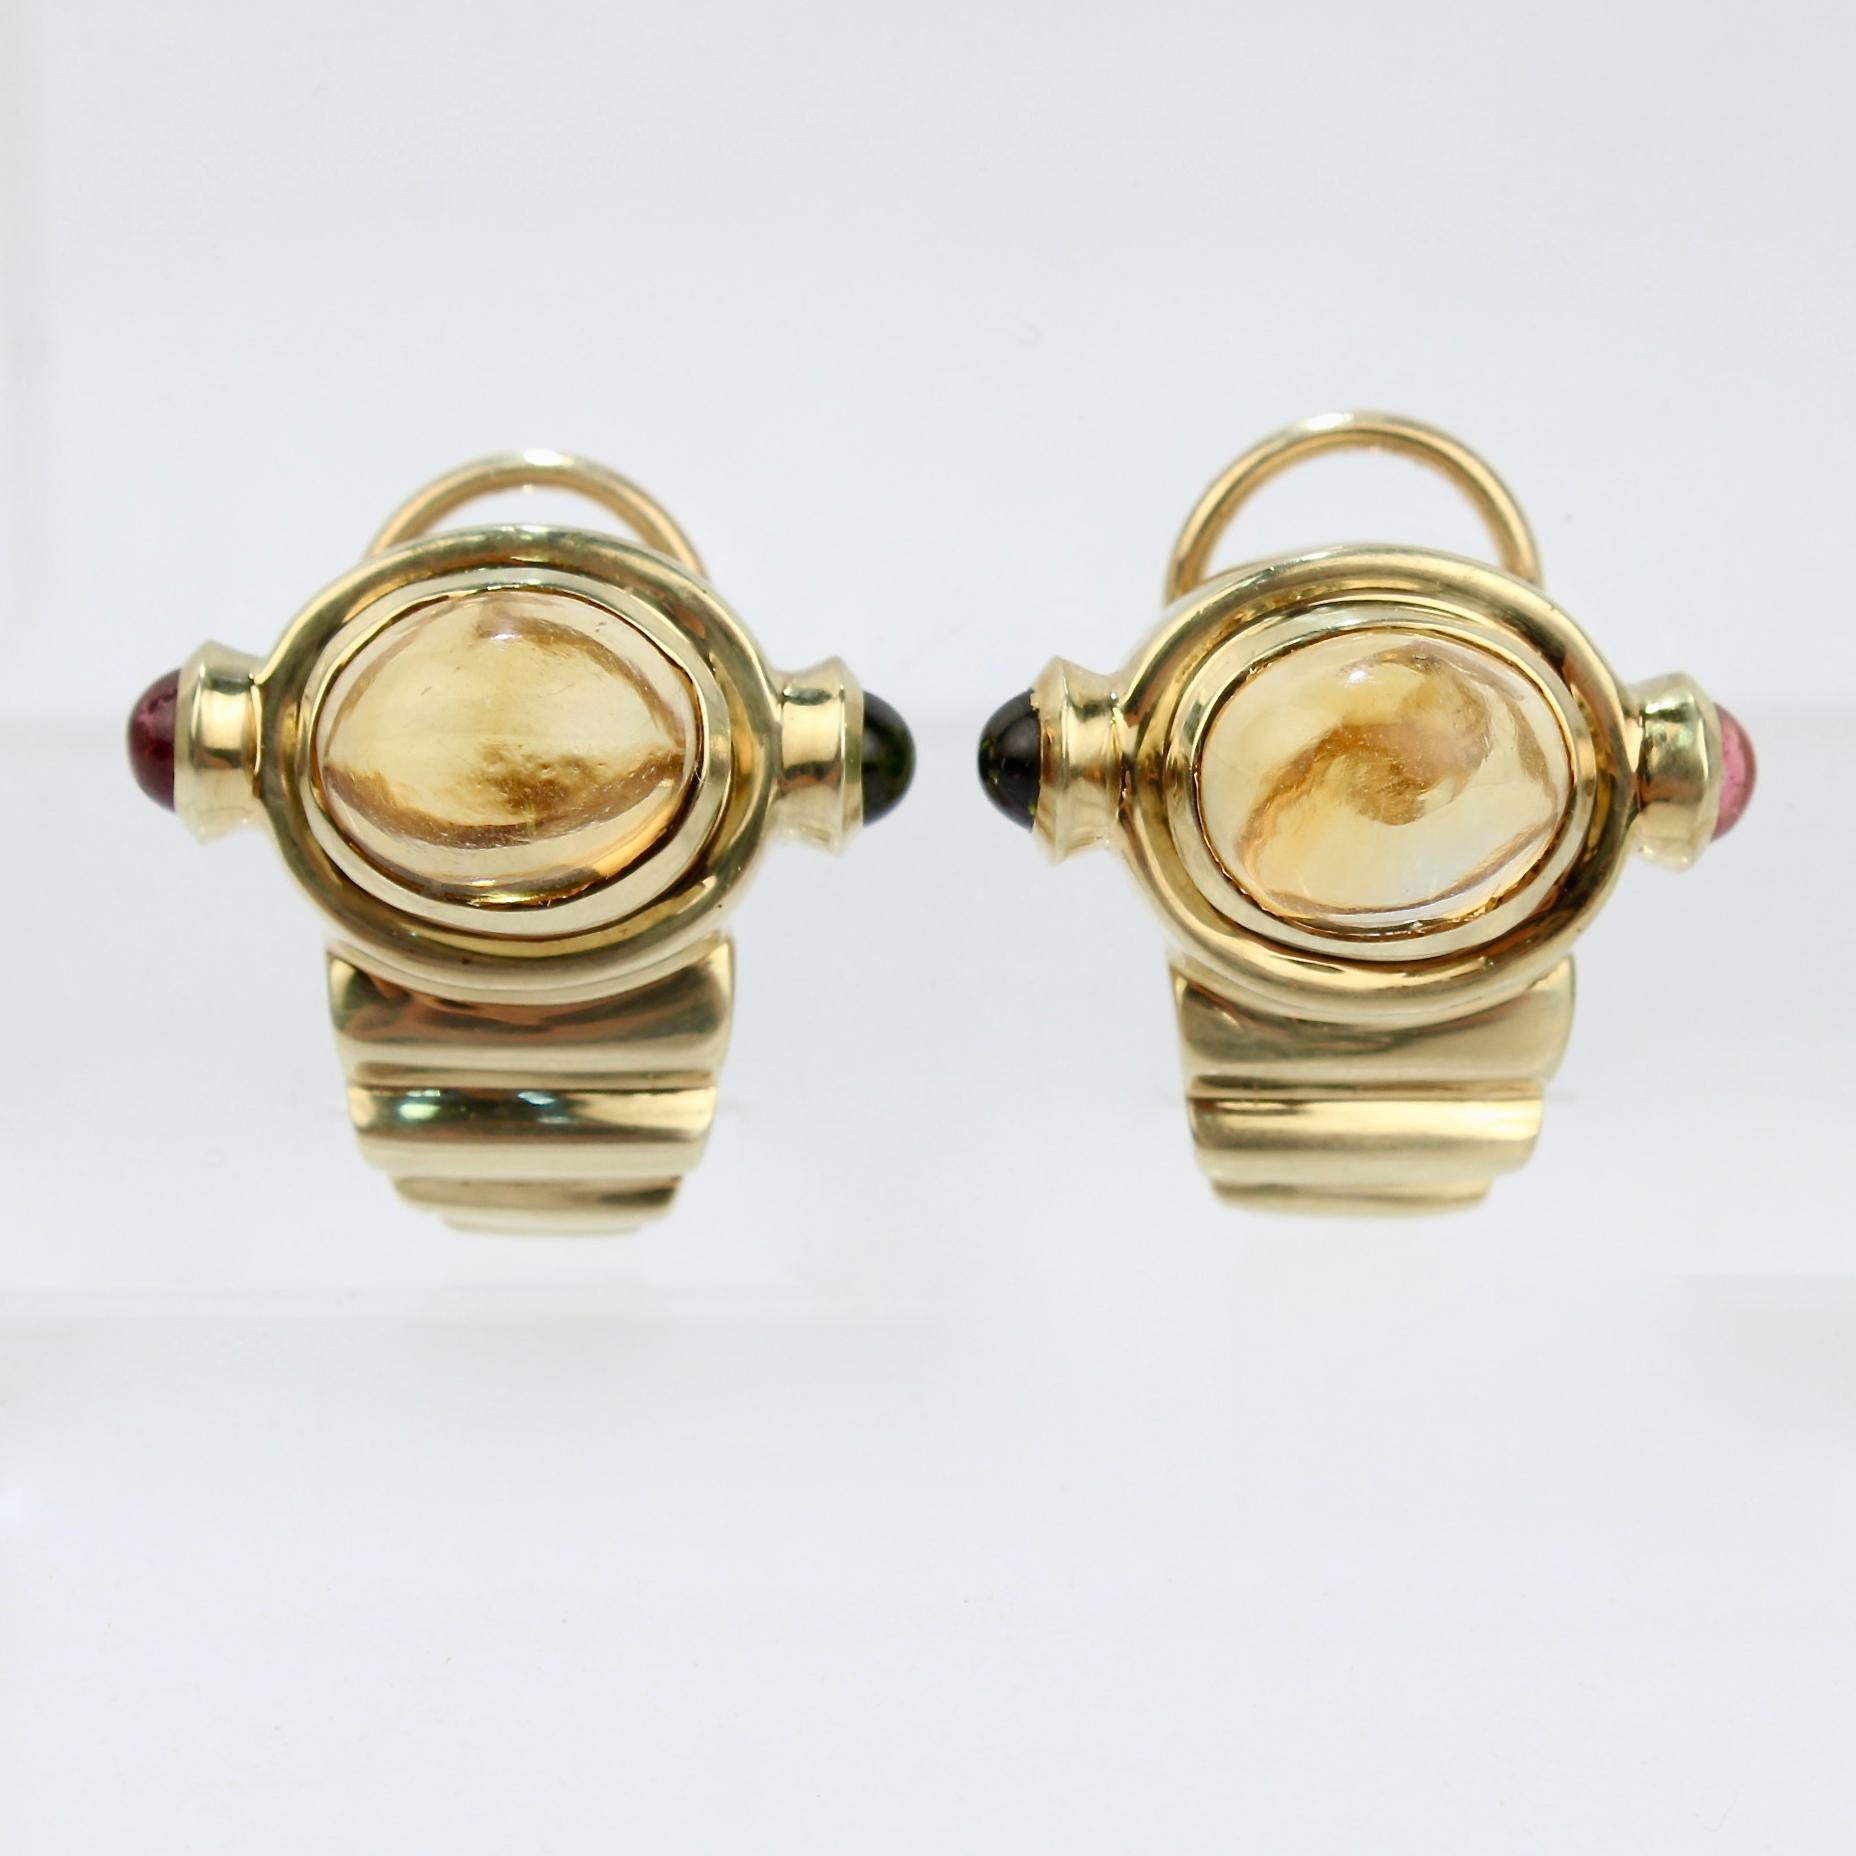 A pair of retro gemstone earrings in 14 karat gold.

At their center, the earrings have a bezel set citrine cabochon that is flanked by a bezel set pink and green tourmaline cabochon on either side.  

Four tapering steps support the